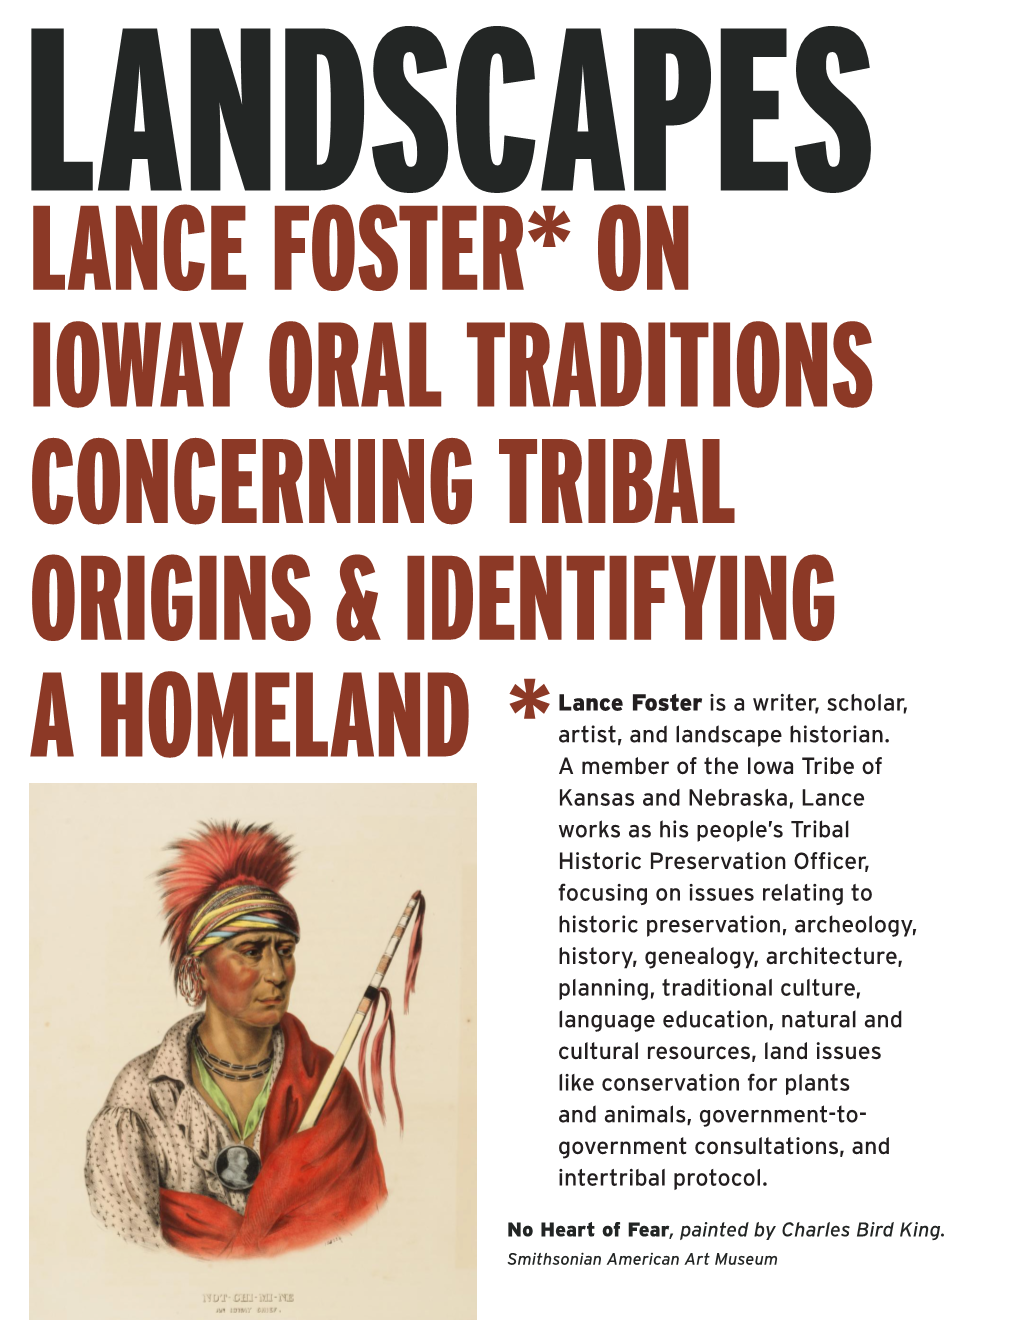 Lance Foster* on Ioway Oral Traditions Concerning Tribal Origins & Identifying